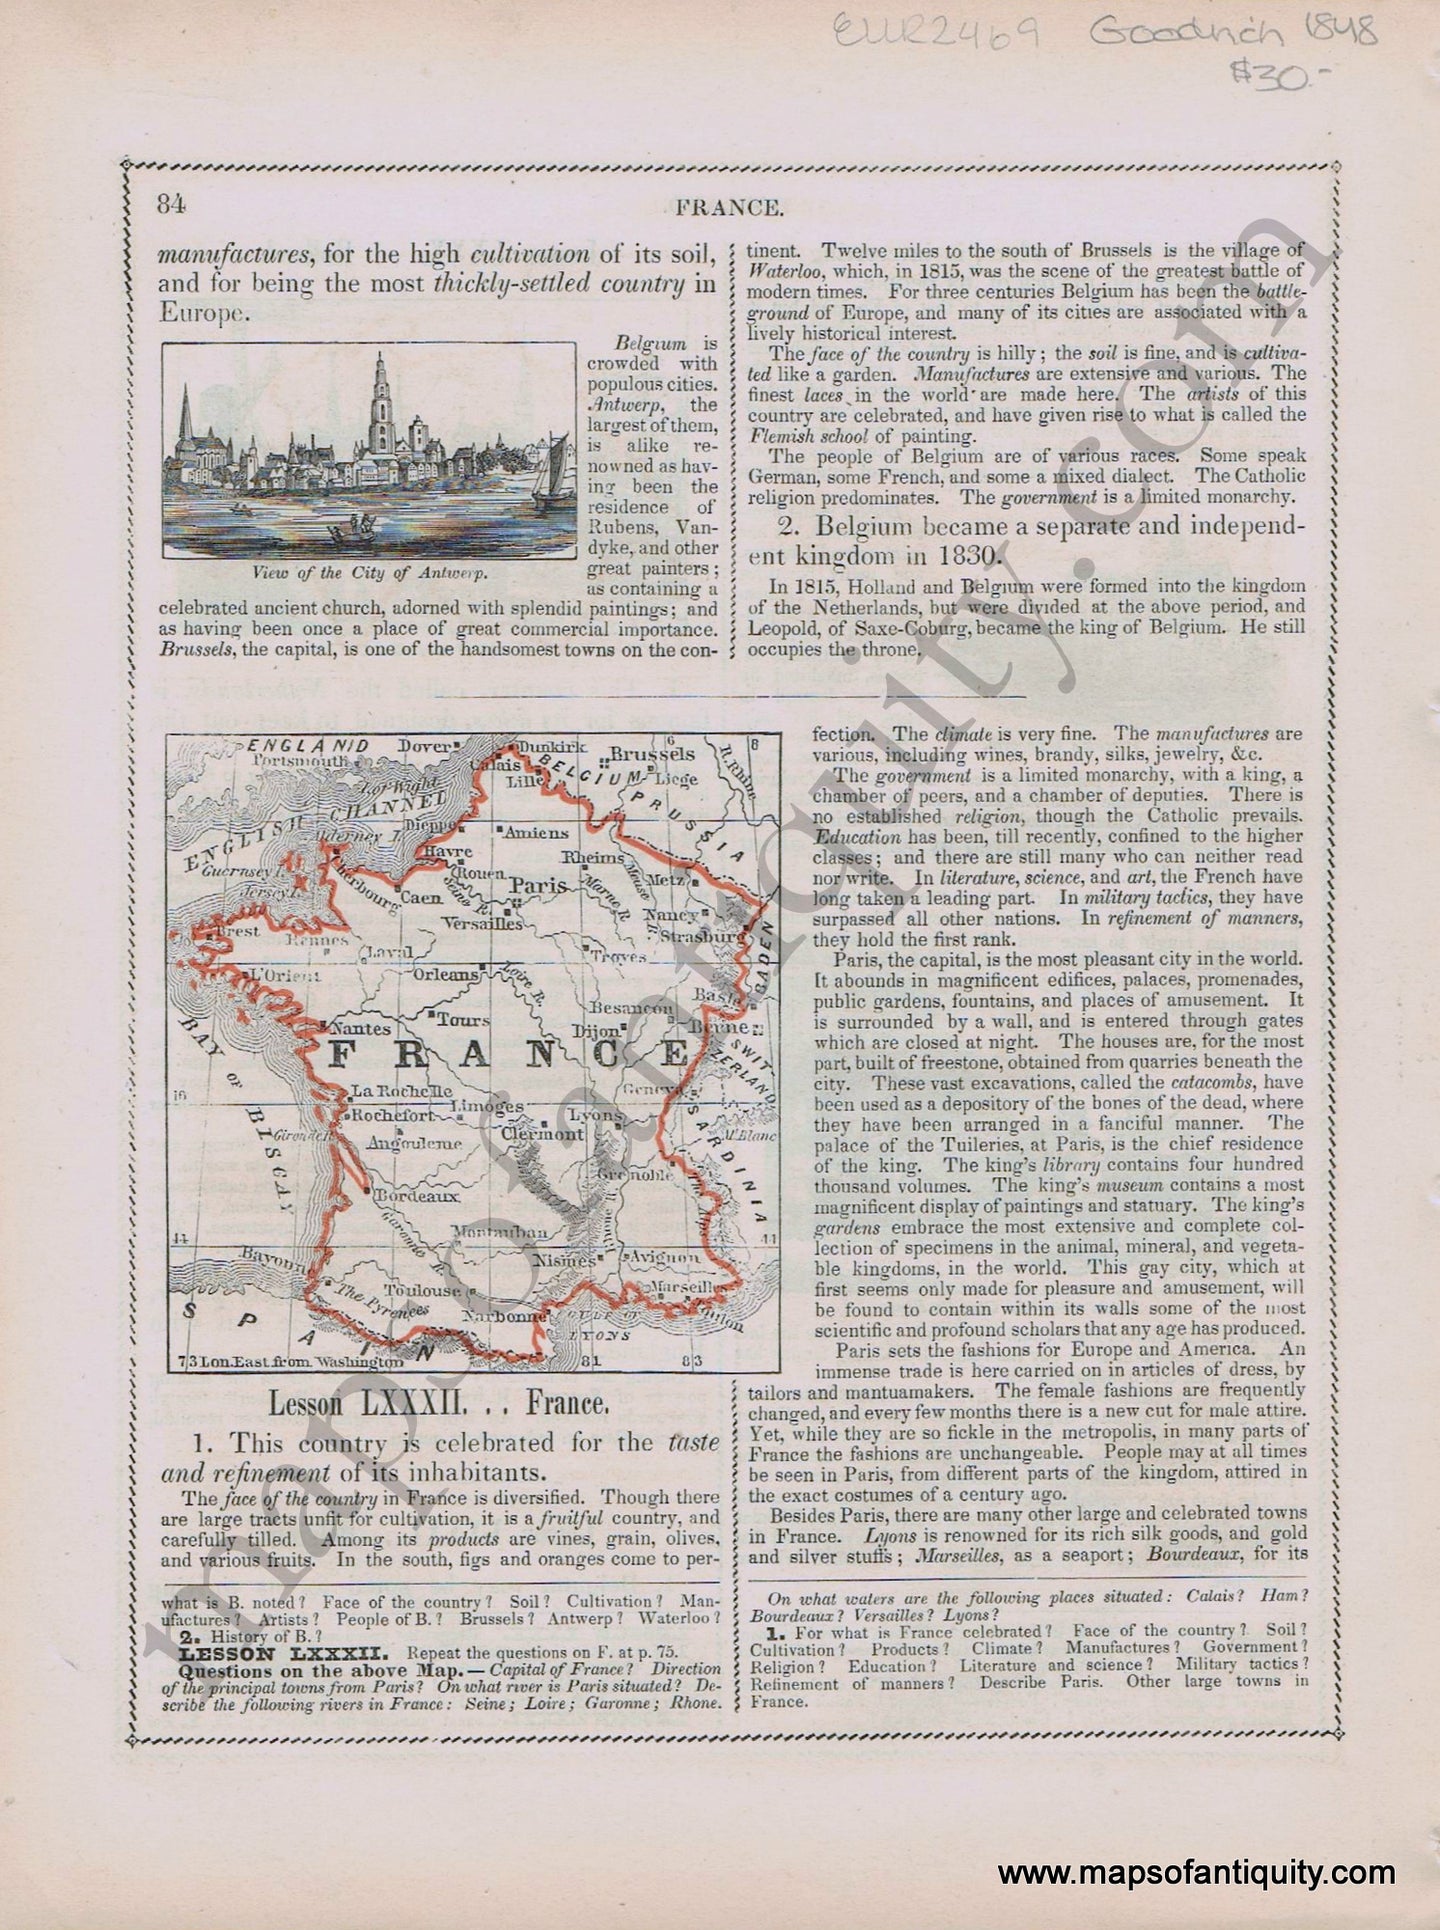 Antique-Printed-Color-Map-France-1848-Goodrich-France-1800s-19th-century-Maps-of-Antiquity